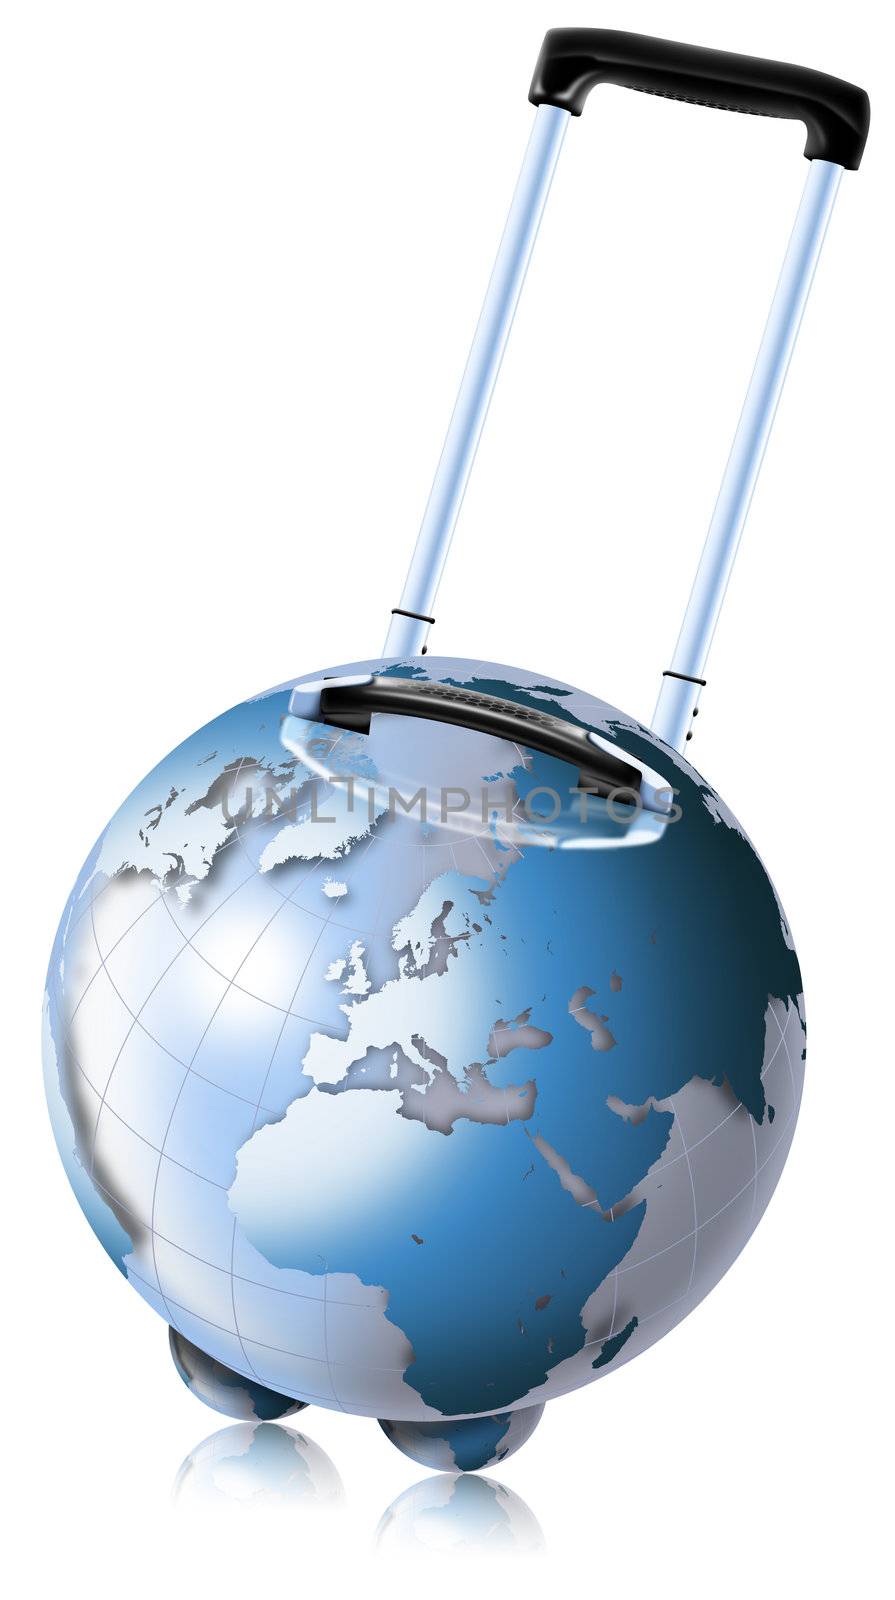 Trolley-shaped blue globe for travel by plane, ship and train